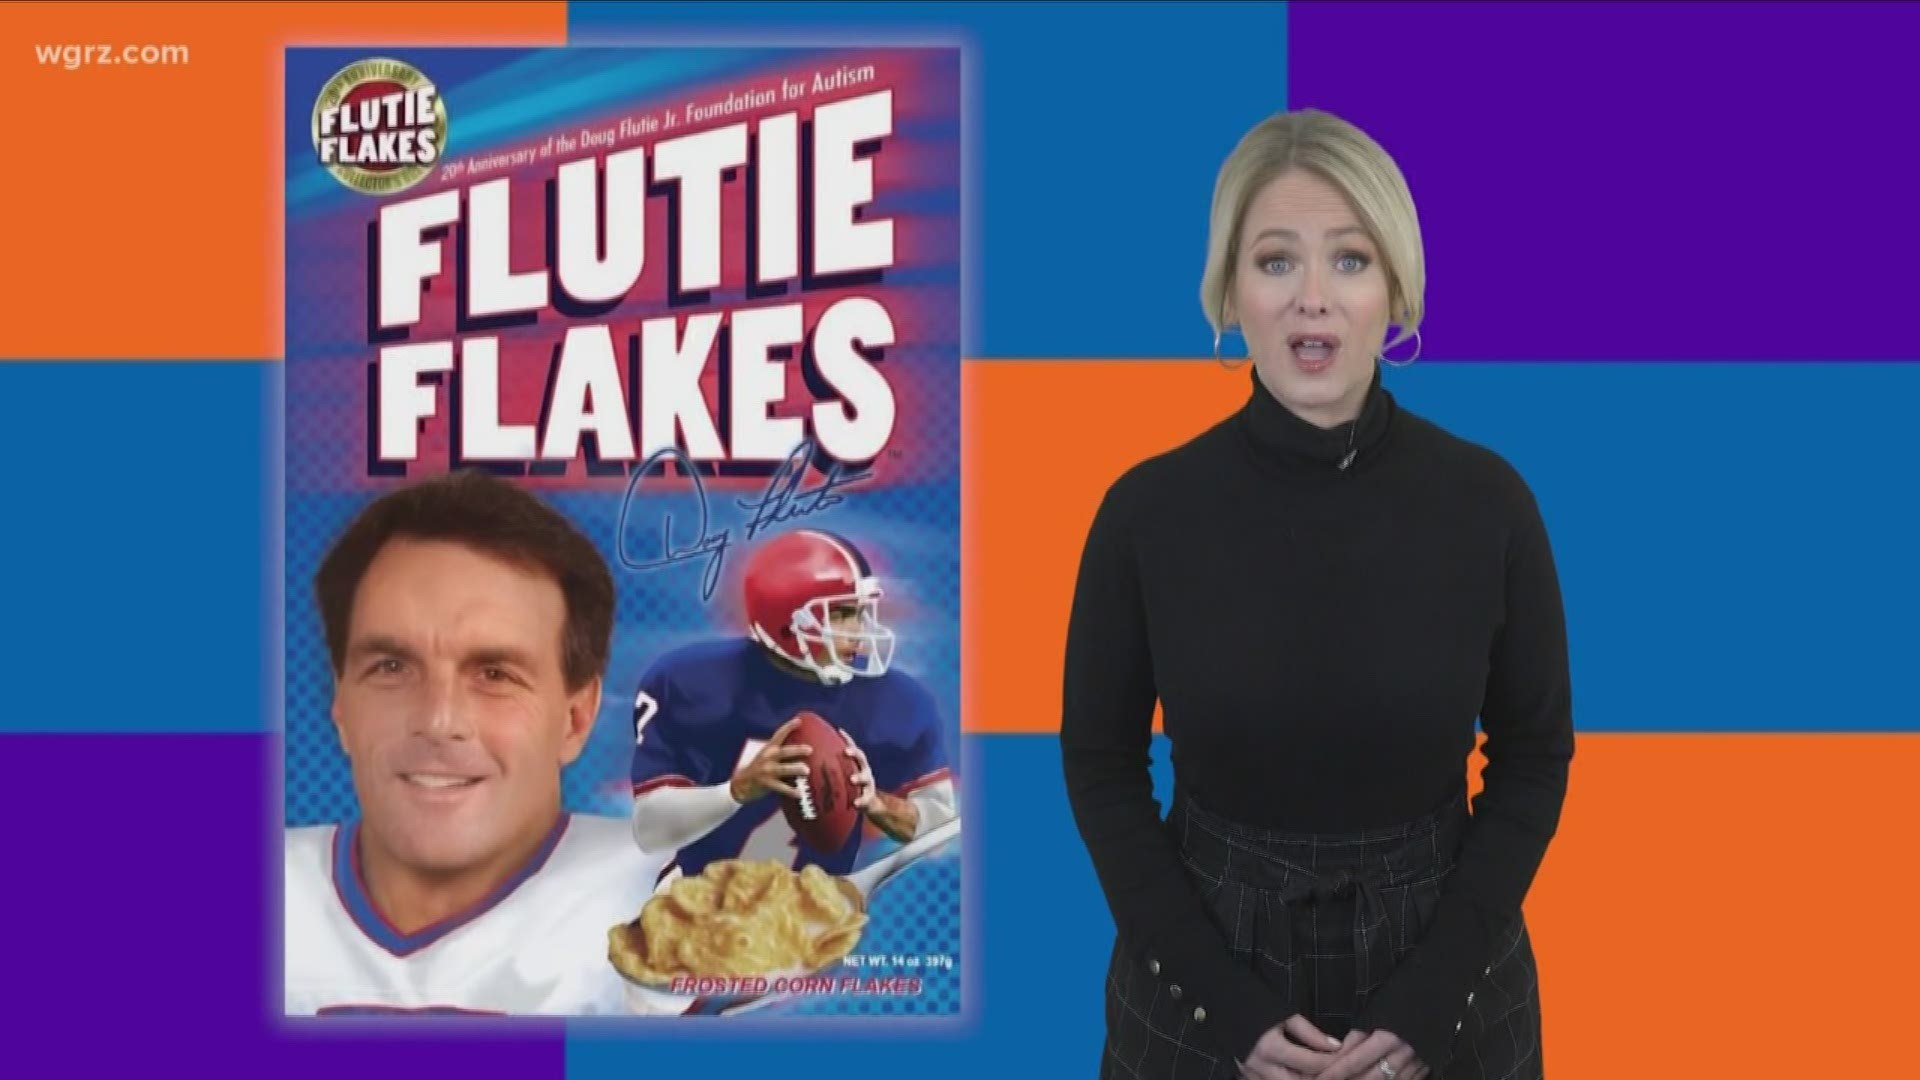 Most Buffalo stories of the day: 'flutie flakes'